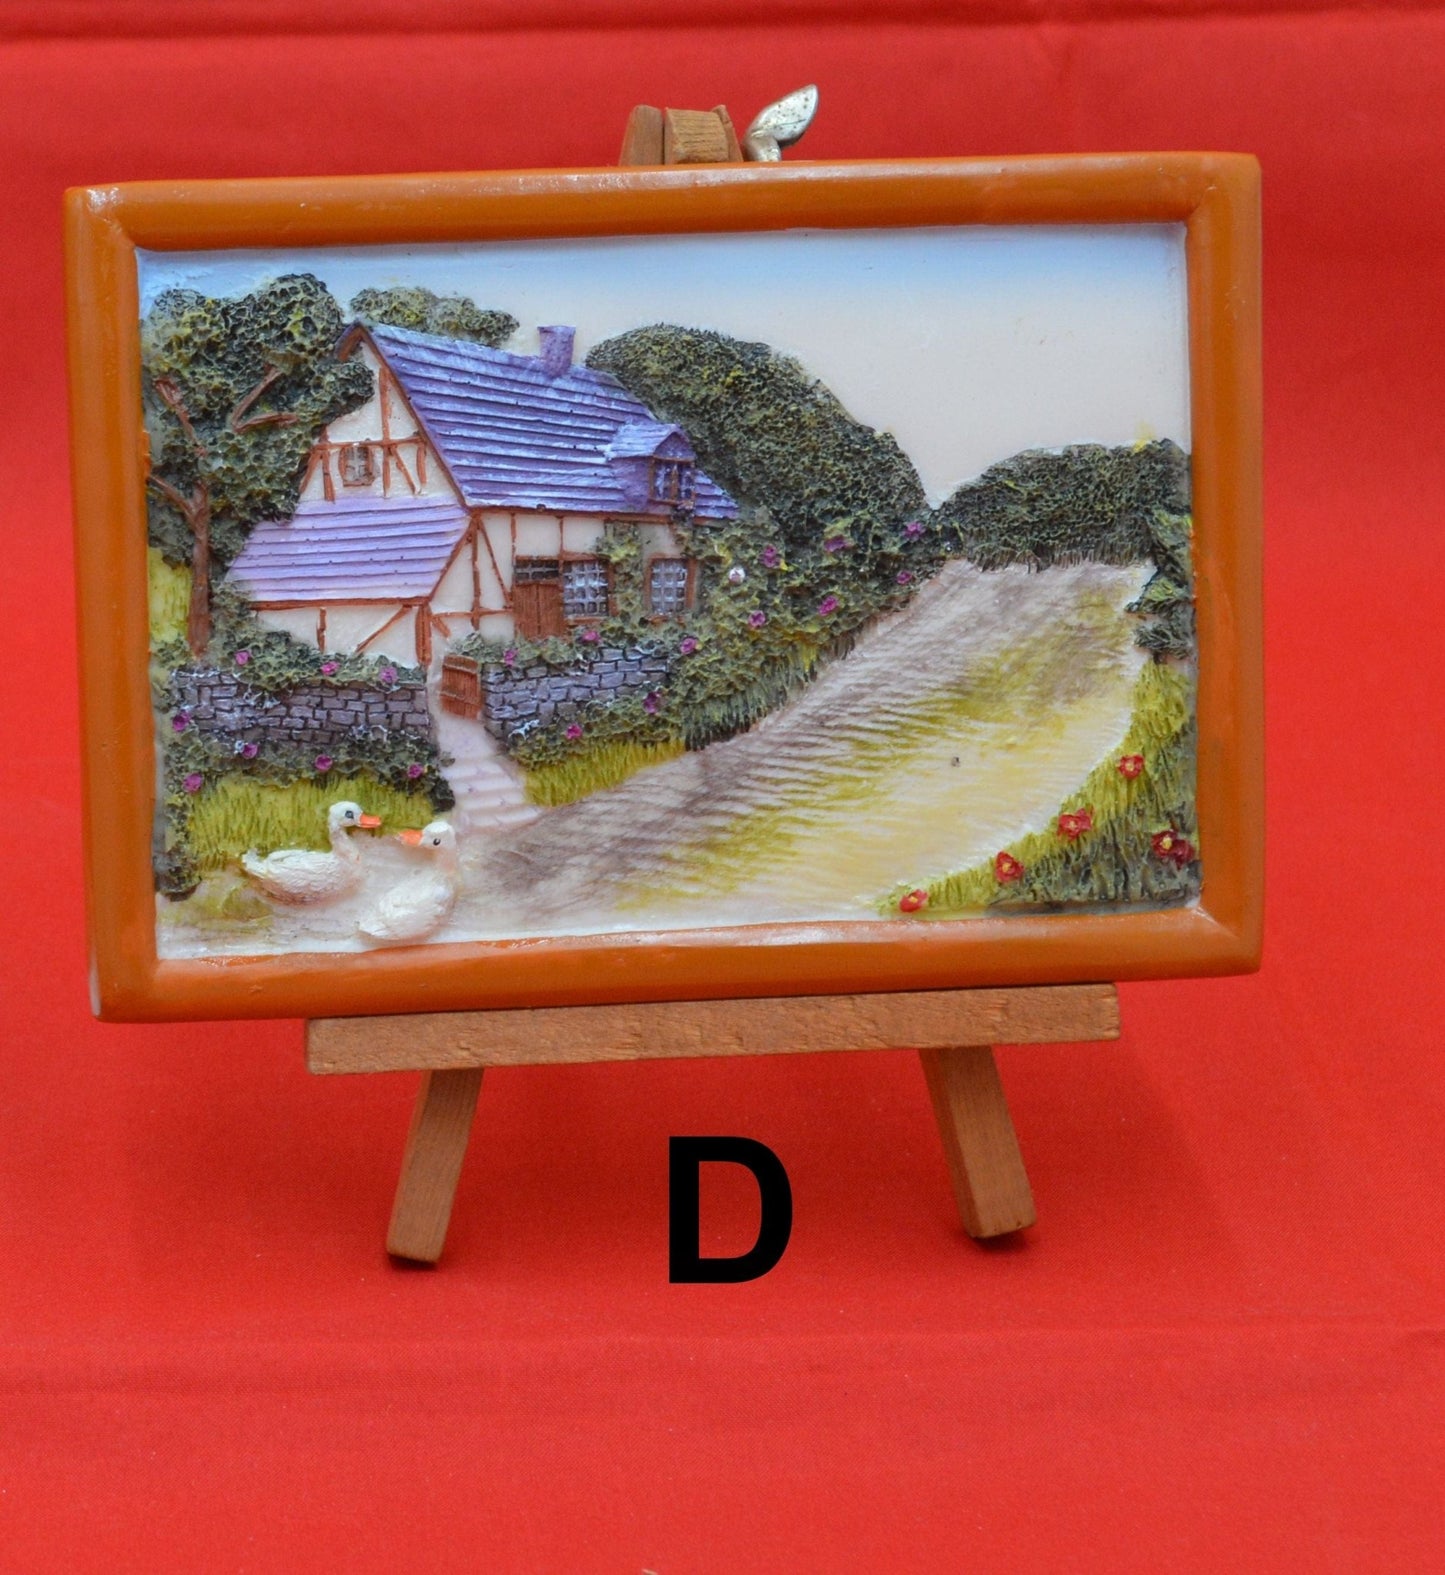 DECORATIVE ORNAMENTS SCENIC RESIN PICTURES ON AN EASEL - TMD167207